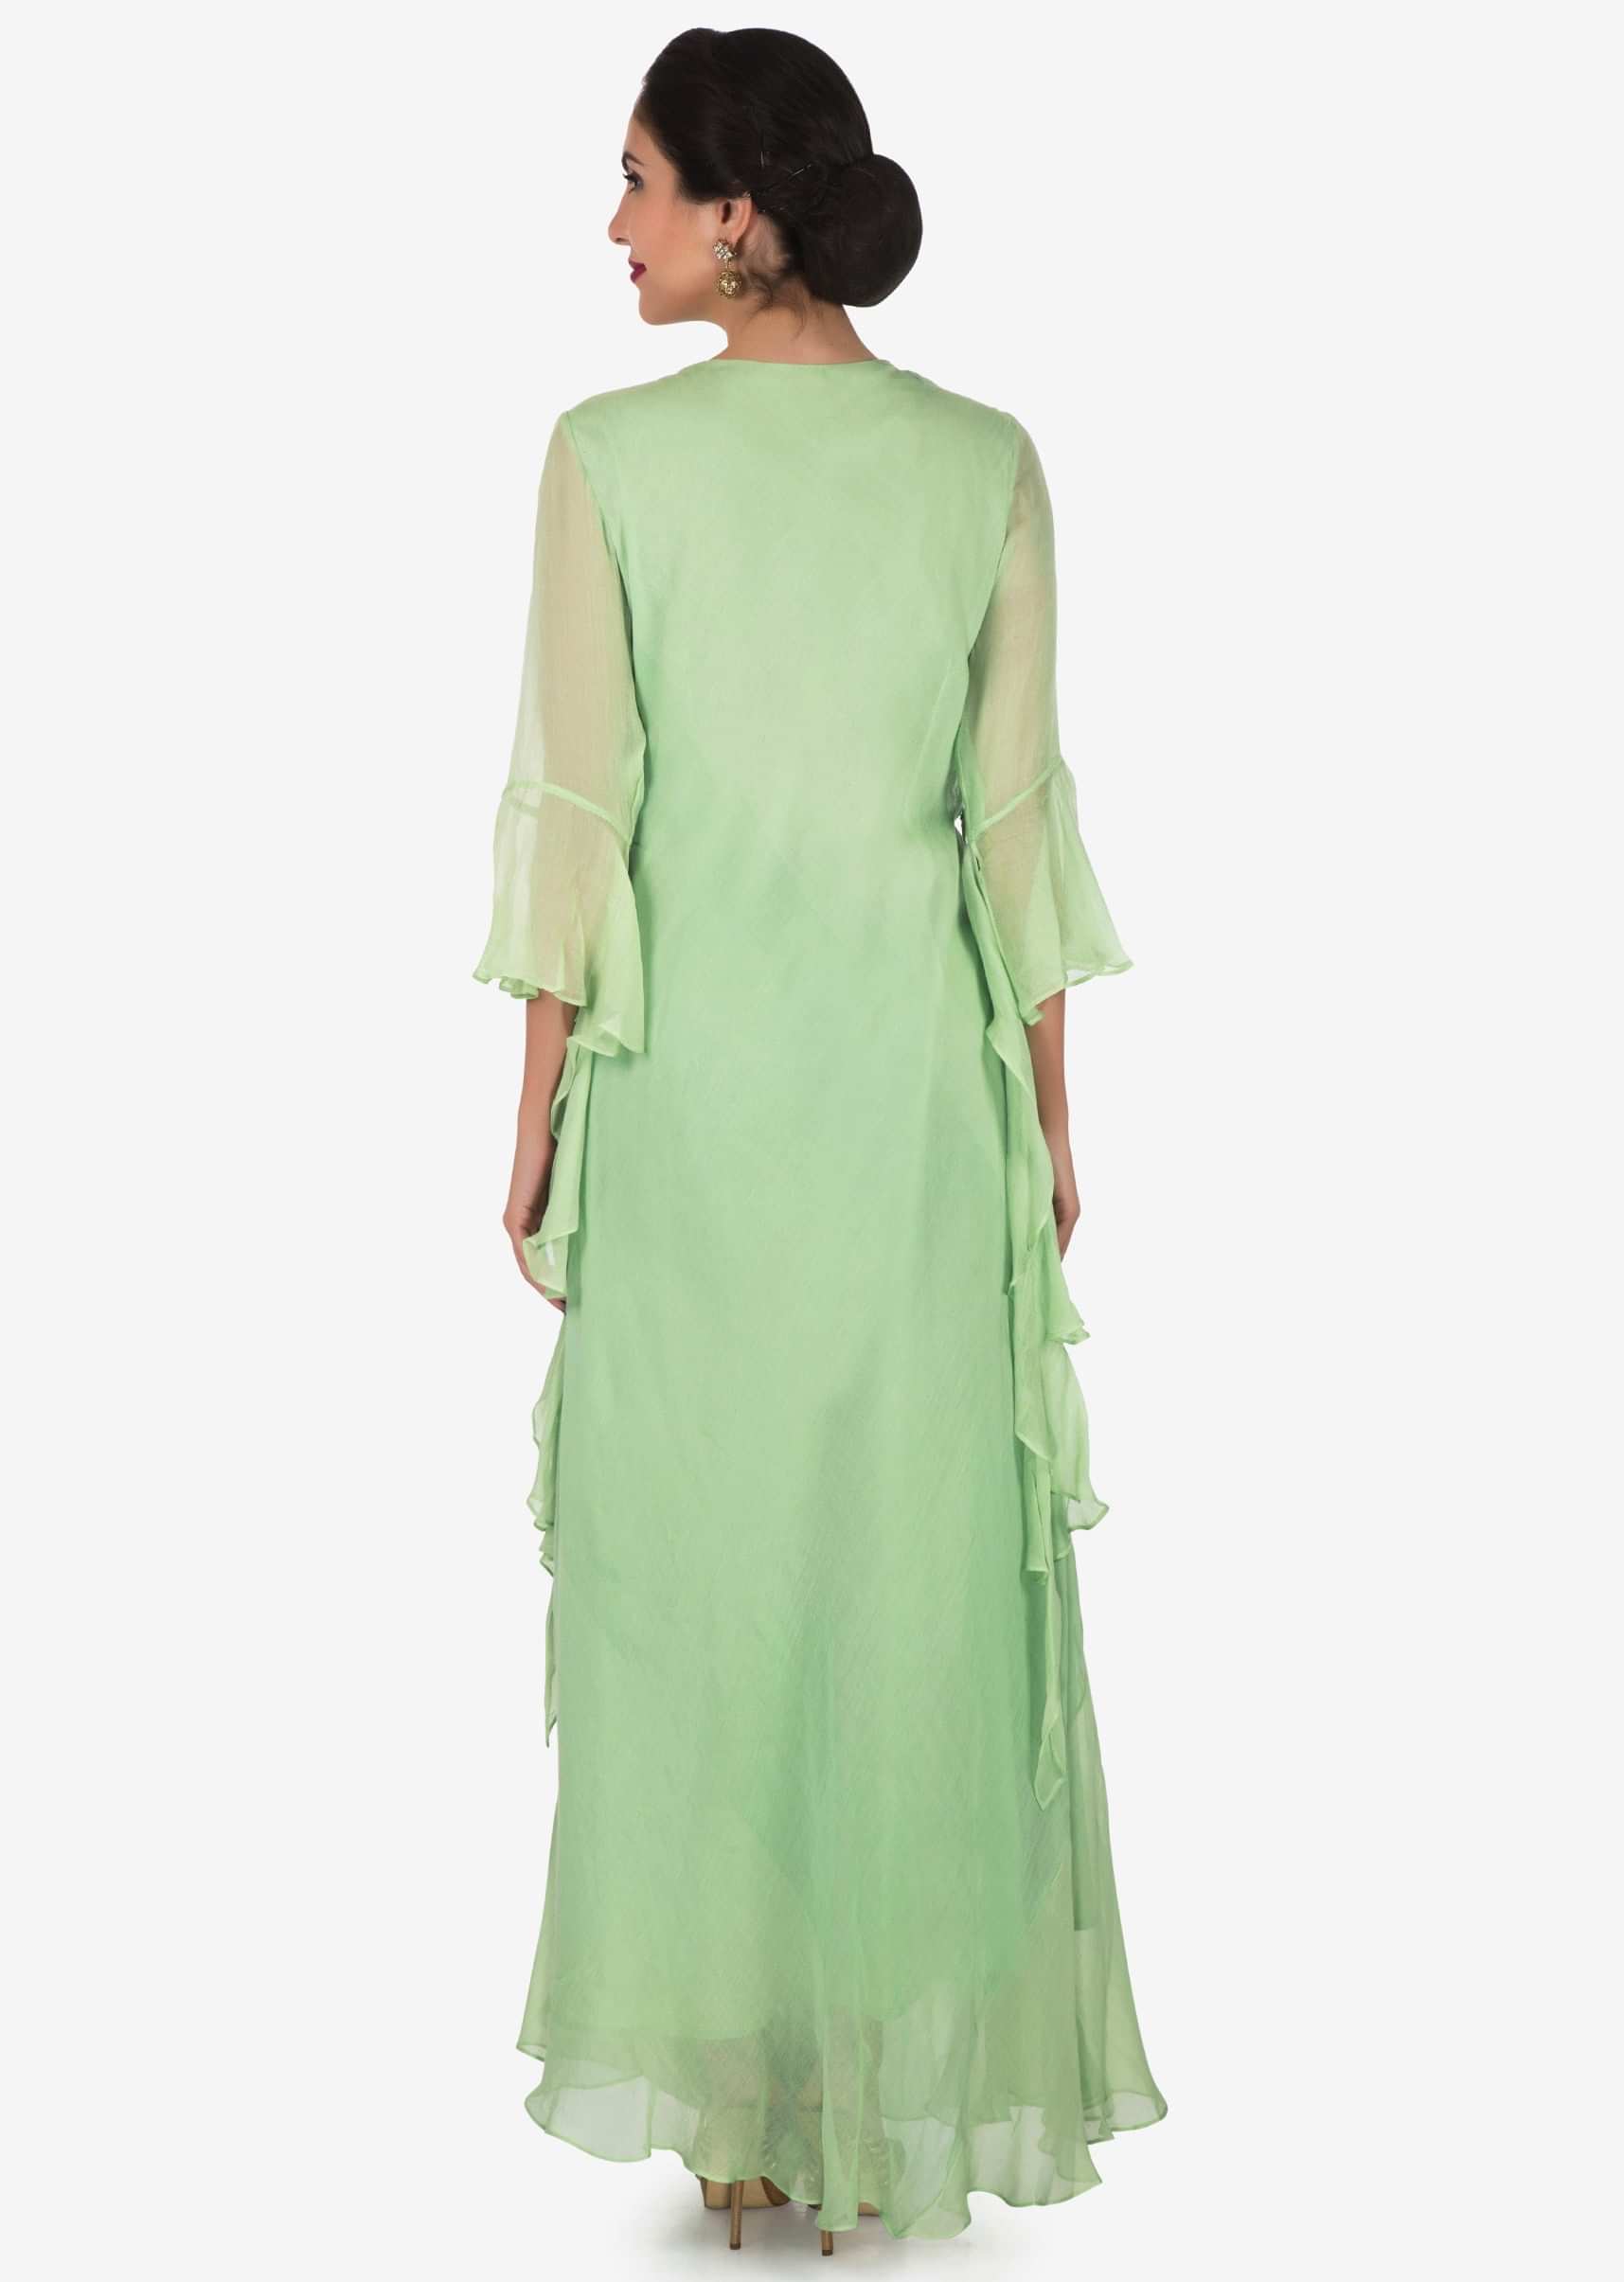 Pista green tunic in cotton with a embroidered tassel at the bodice only on Kalki